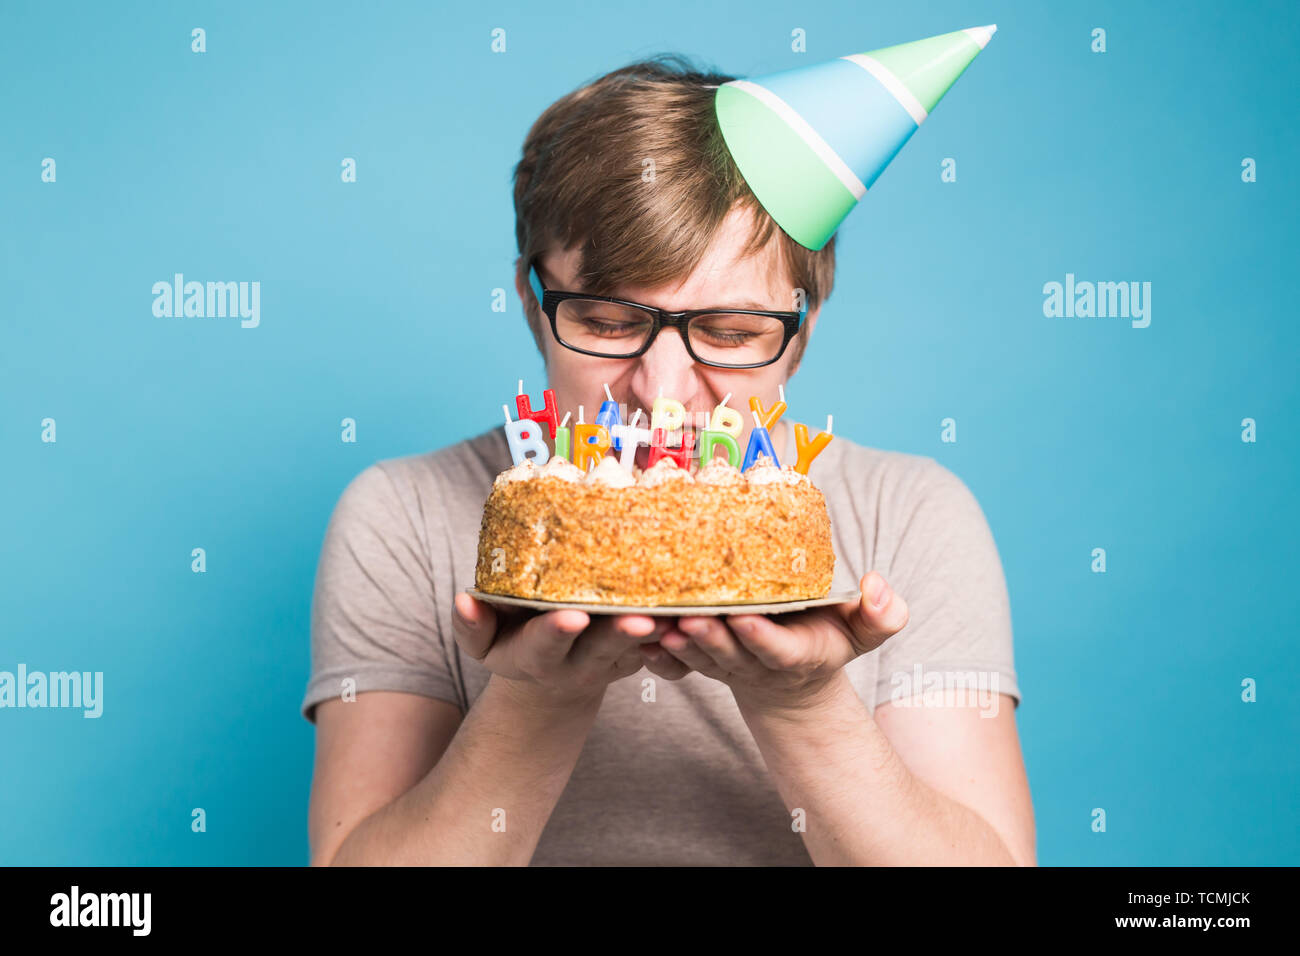 Funny Male In Paper Congratulatory Hat Trying To Bite Off A Cake With A Happy Birthday Candles Stand On A Blue Background Stock Photo Alamy,Toddler Designer Jeans